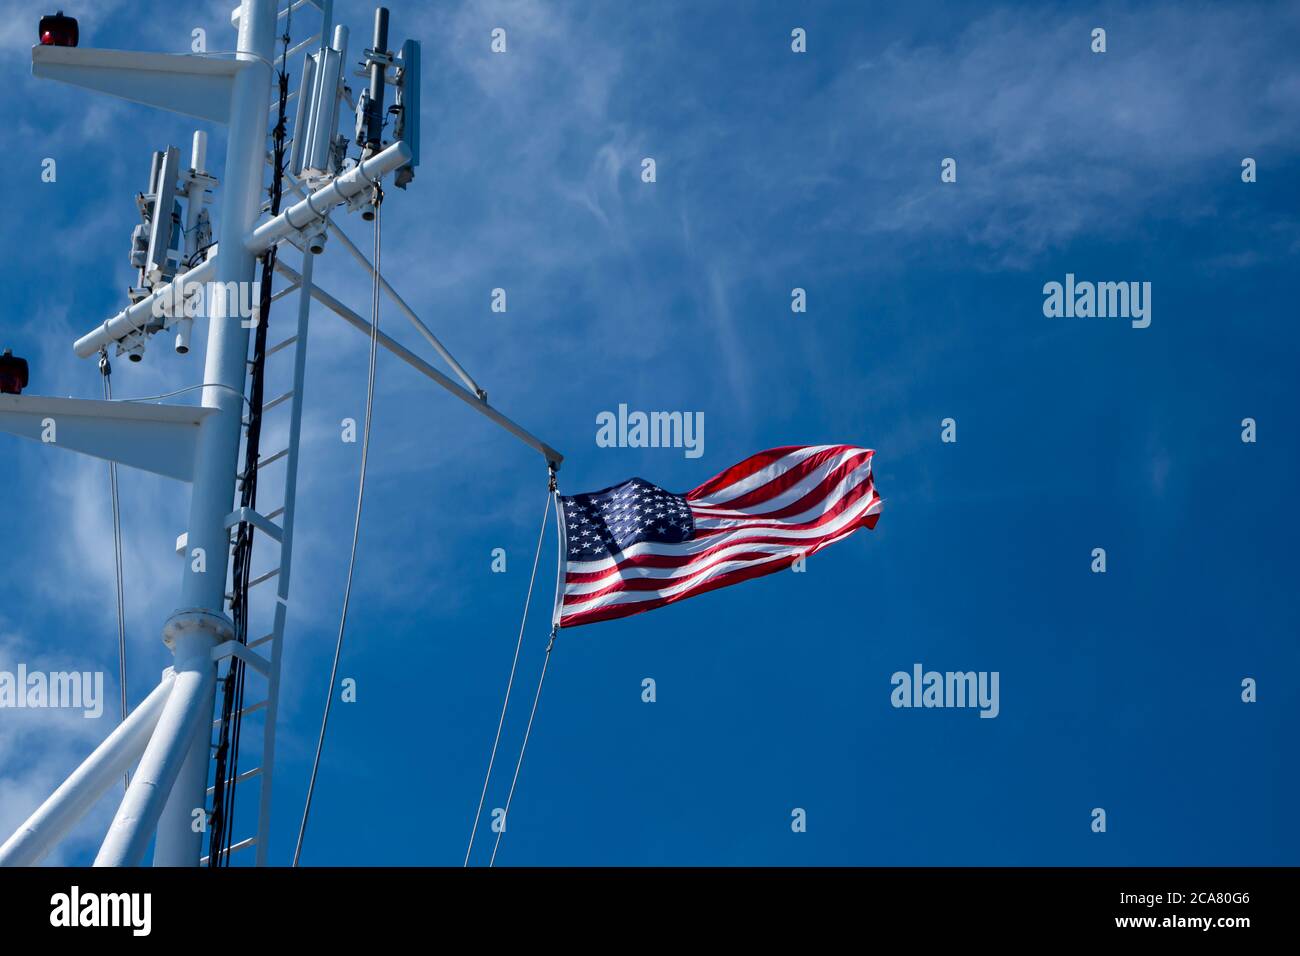 An American ensign blows in the wind as it hangs from a gaff at the stern of a boat Stock Photo